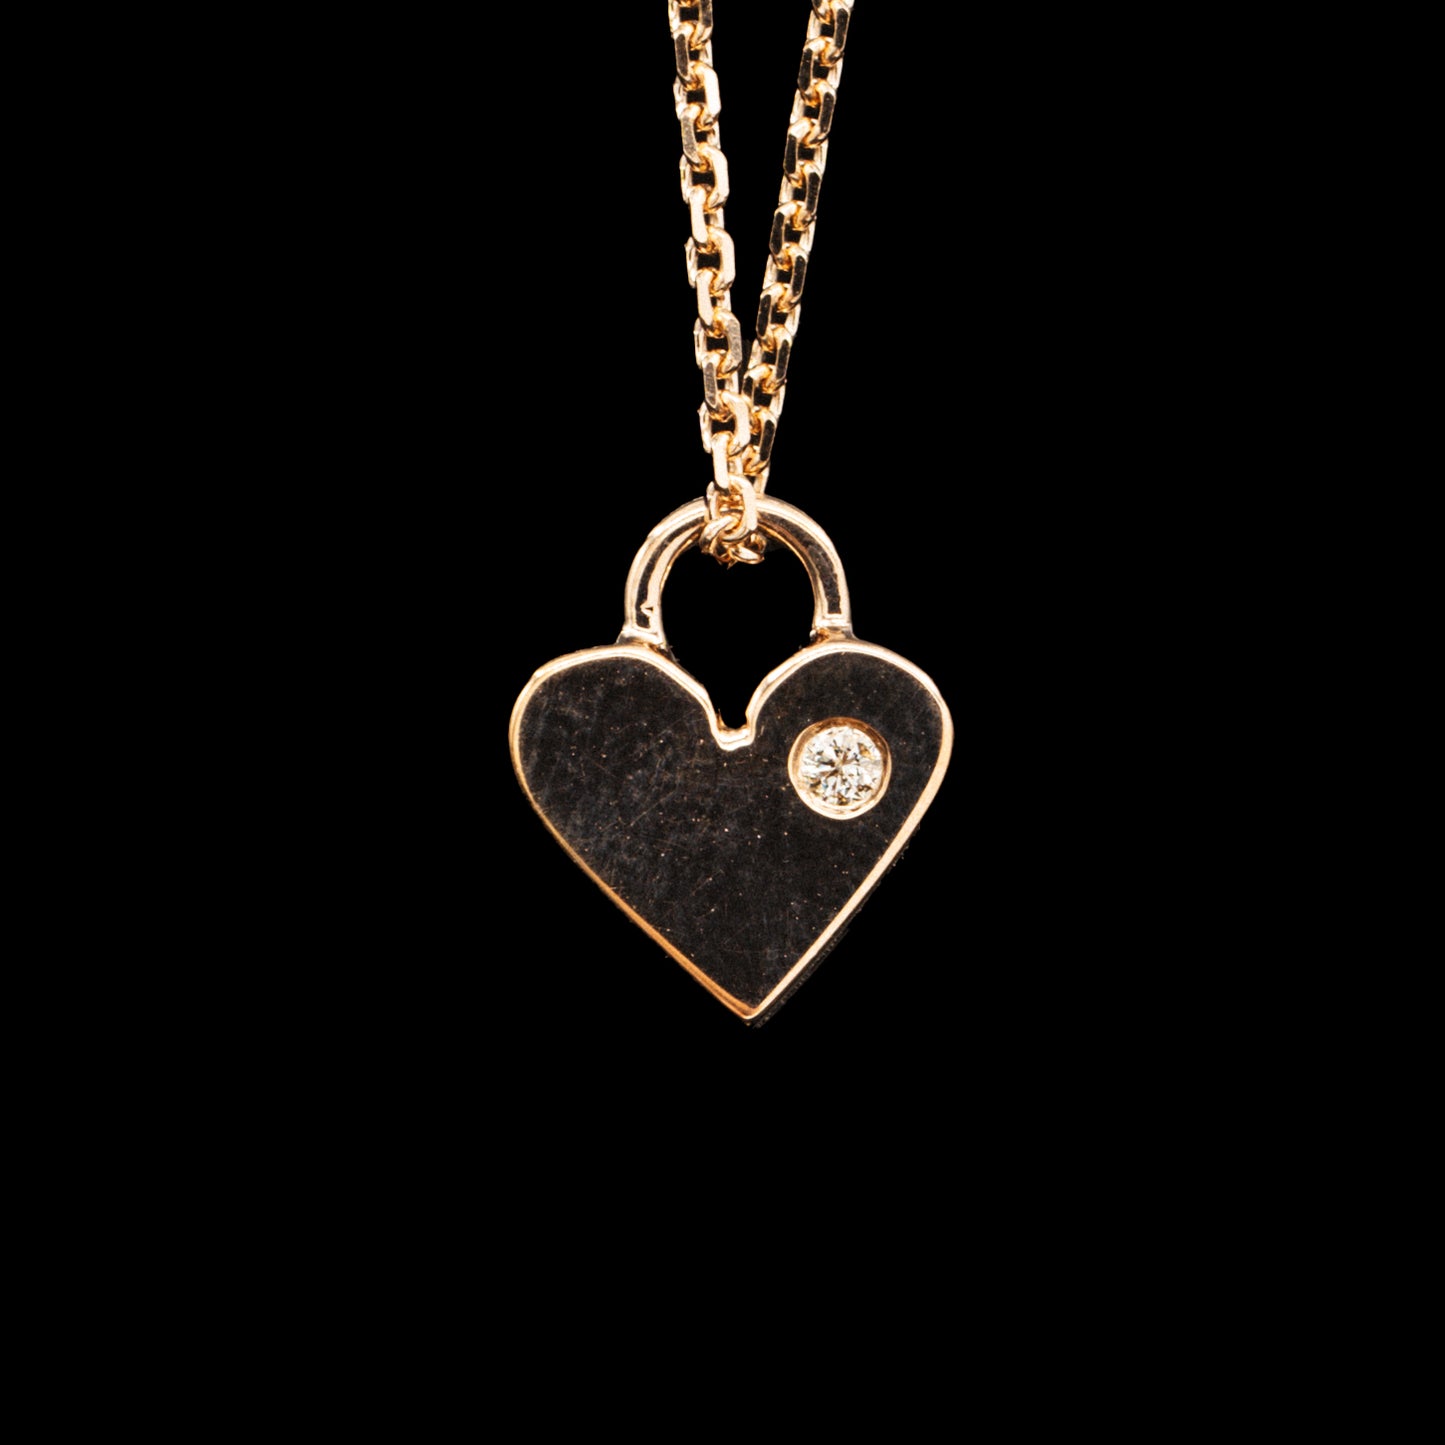 Heart shaped charm necklace with engravings 